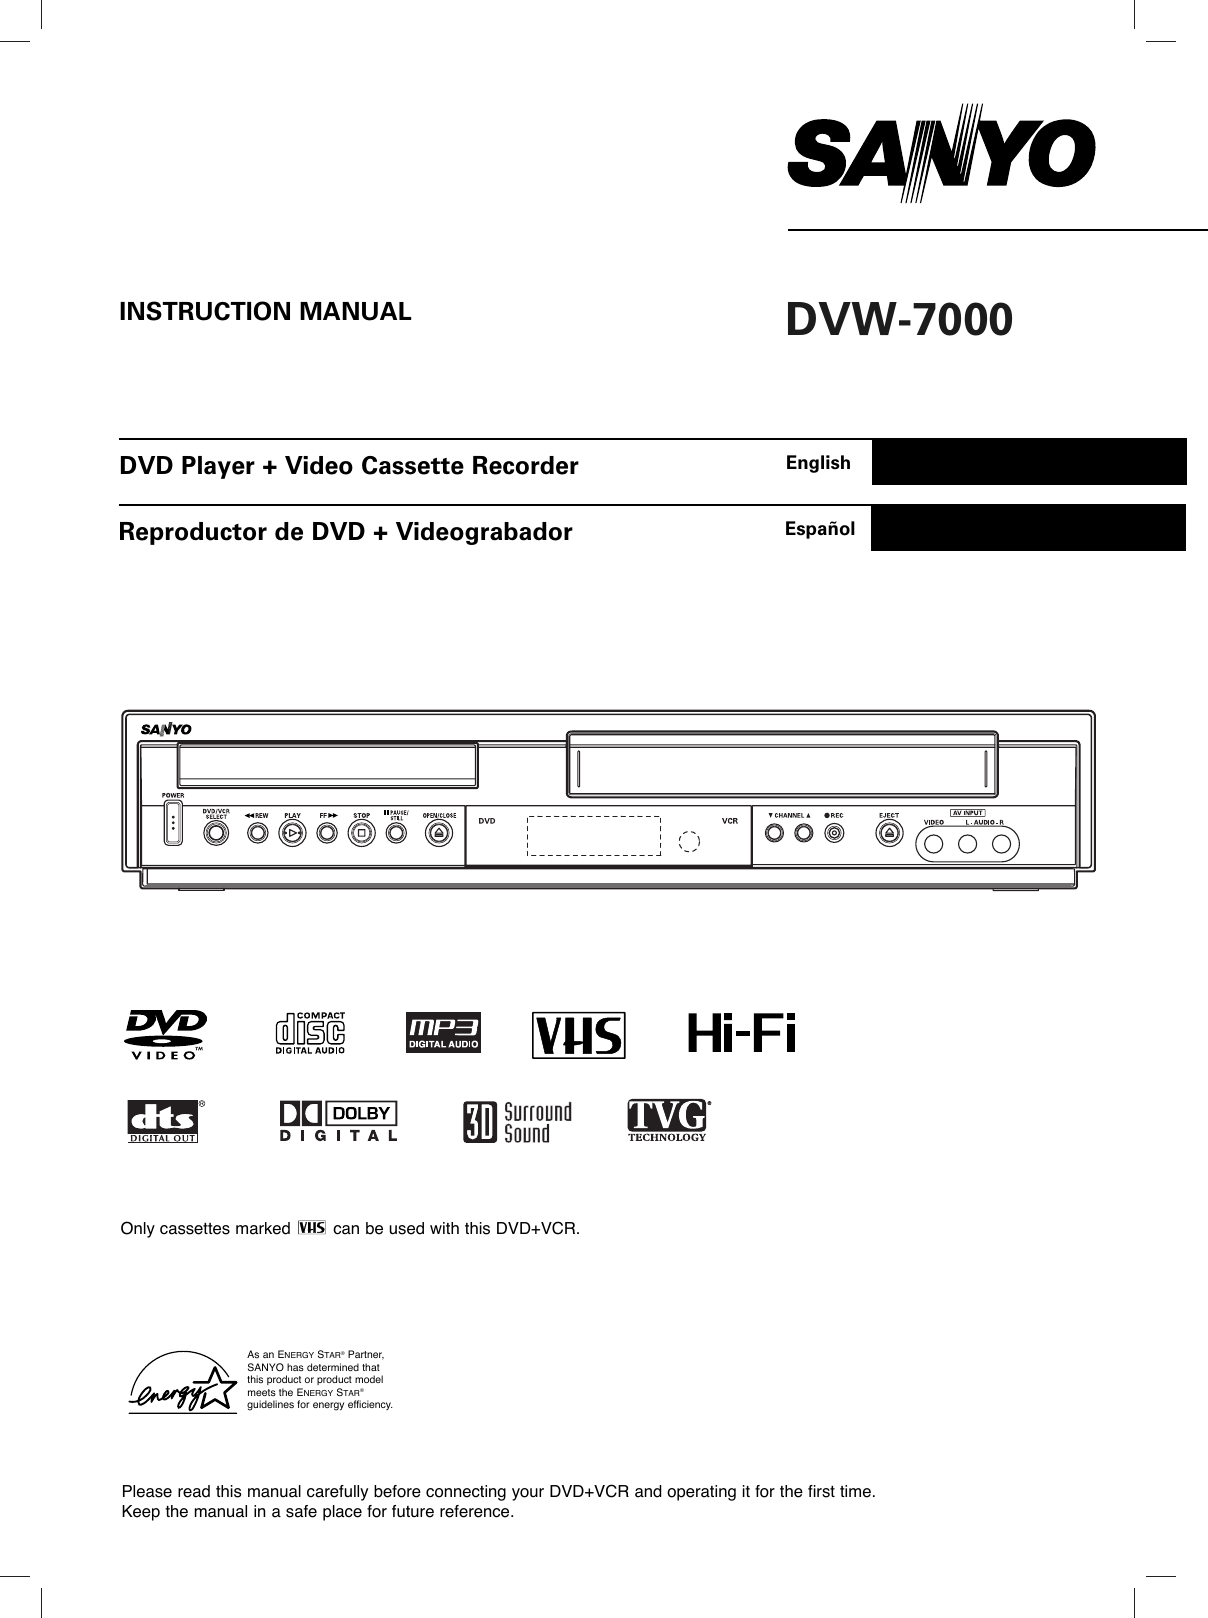 Only cassettes marked  can be used with this DVD+VCR.Please read this manual carefully before connecting your DVD+VCR and operating it for the first time.Keep the manual in a safe place for future reference.As an ENERGY STAR®Partner,SANYO has determined thatthis product or product modelmeets the ENERGY STAR®guidelines for energy efficiency.INSTRUCTION MANUAL DVW-7000DVD Player + Video Cassette Recorder EnglishReproductor de DVD + Videograbador Español